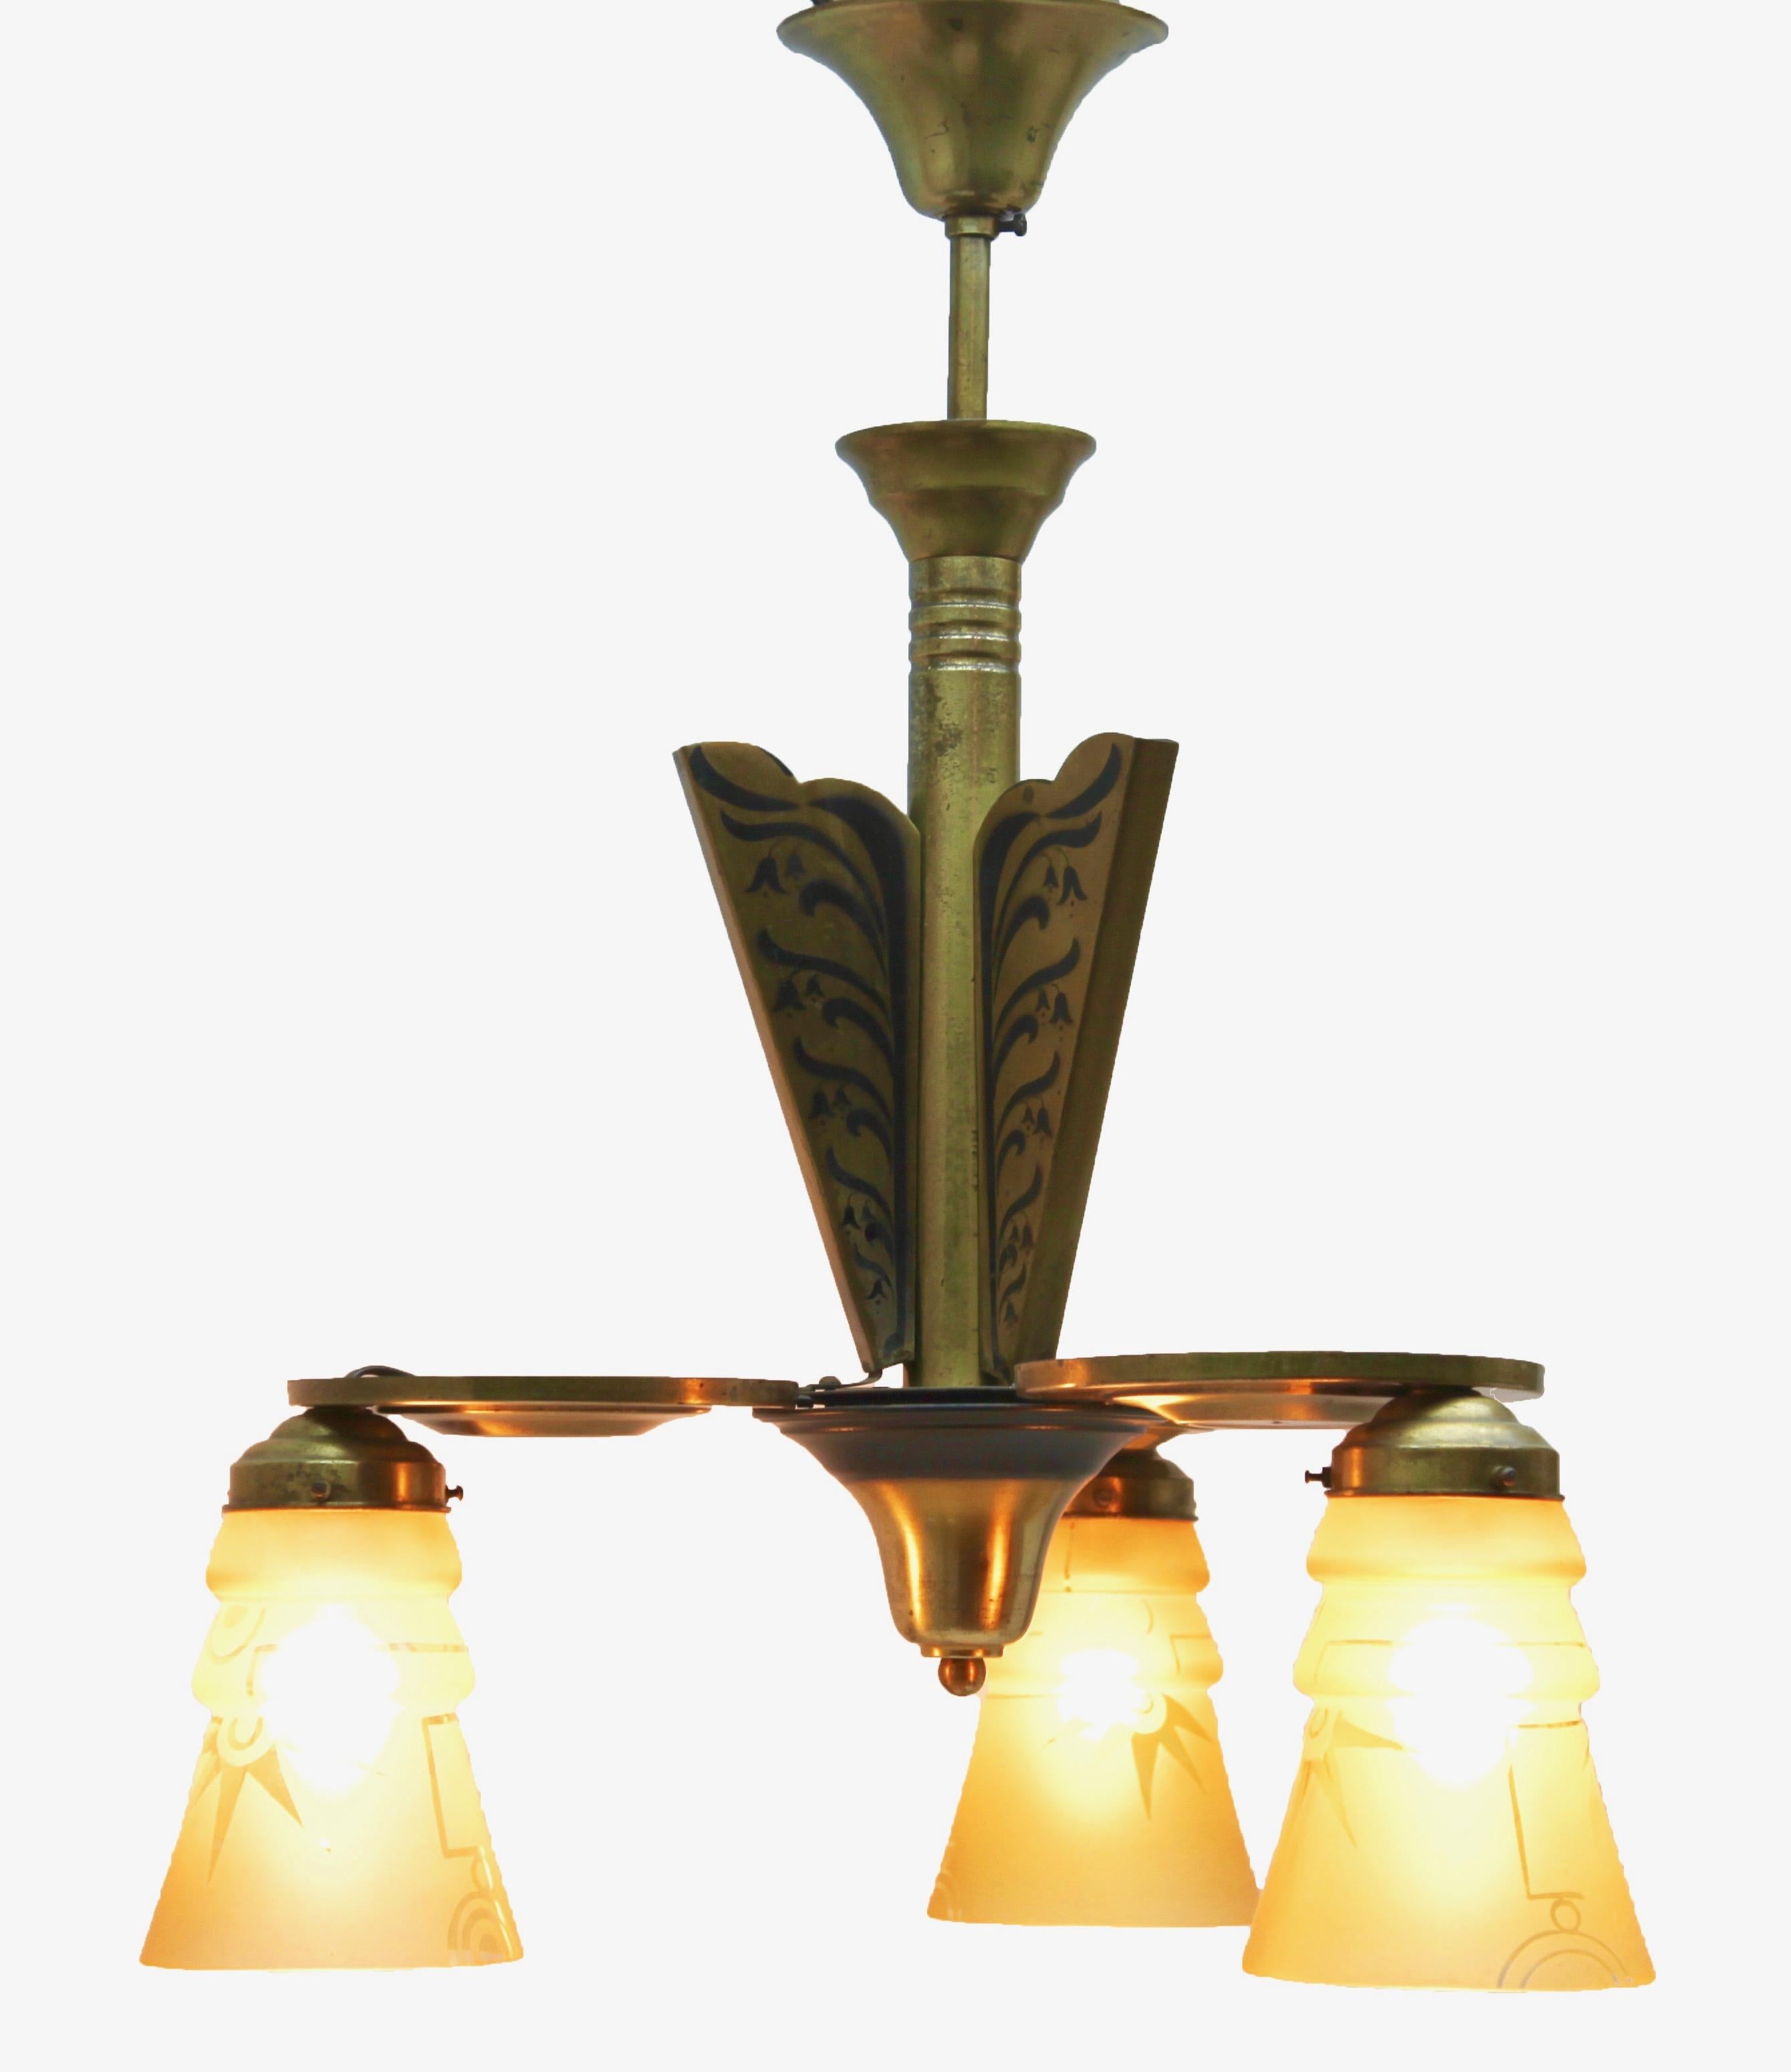 Machine-Made Art Deco Brass Chandelier Three Arms Glass Lampshades Whit Pattern For Sale